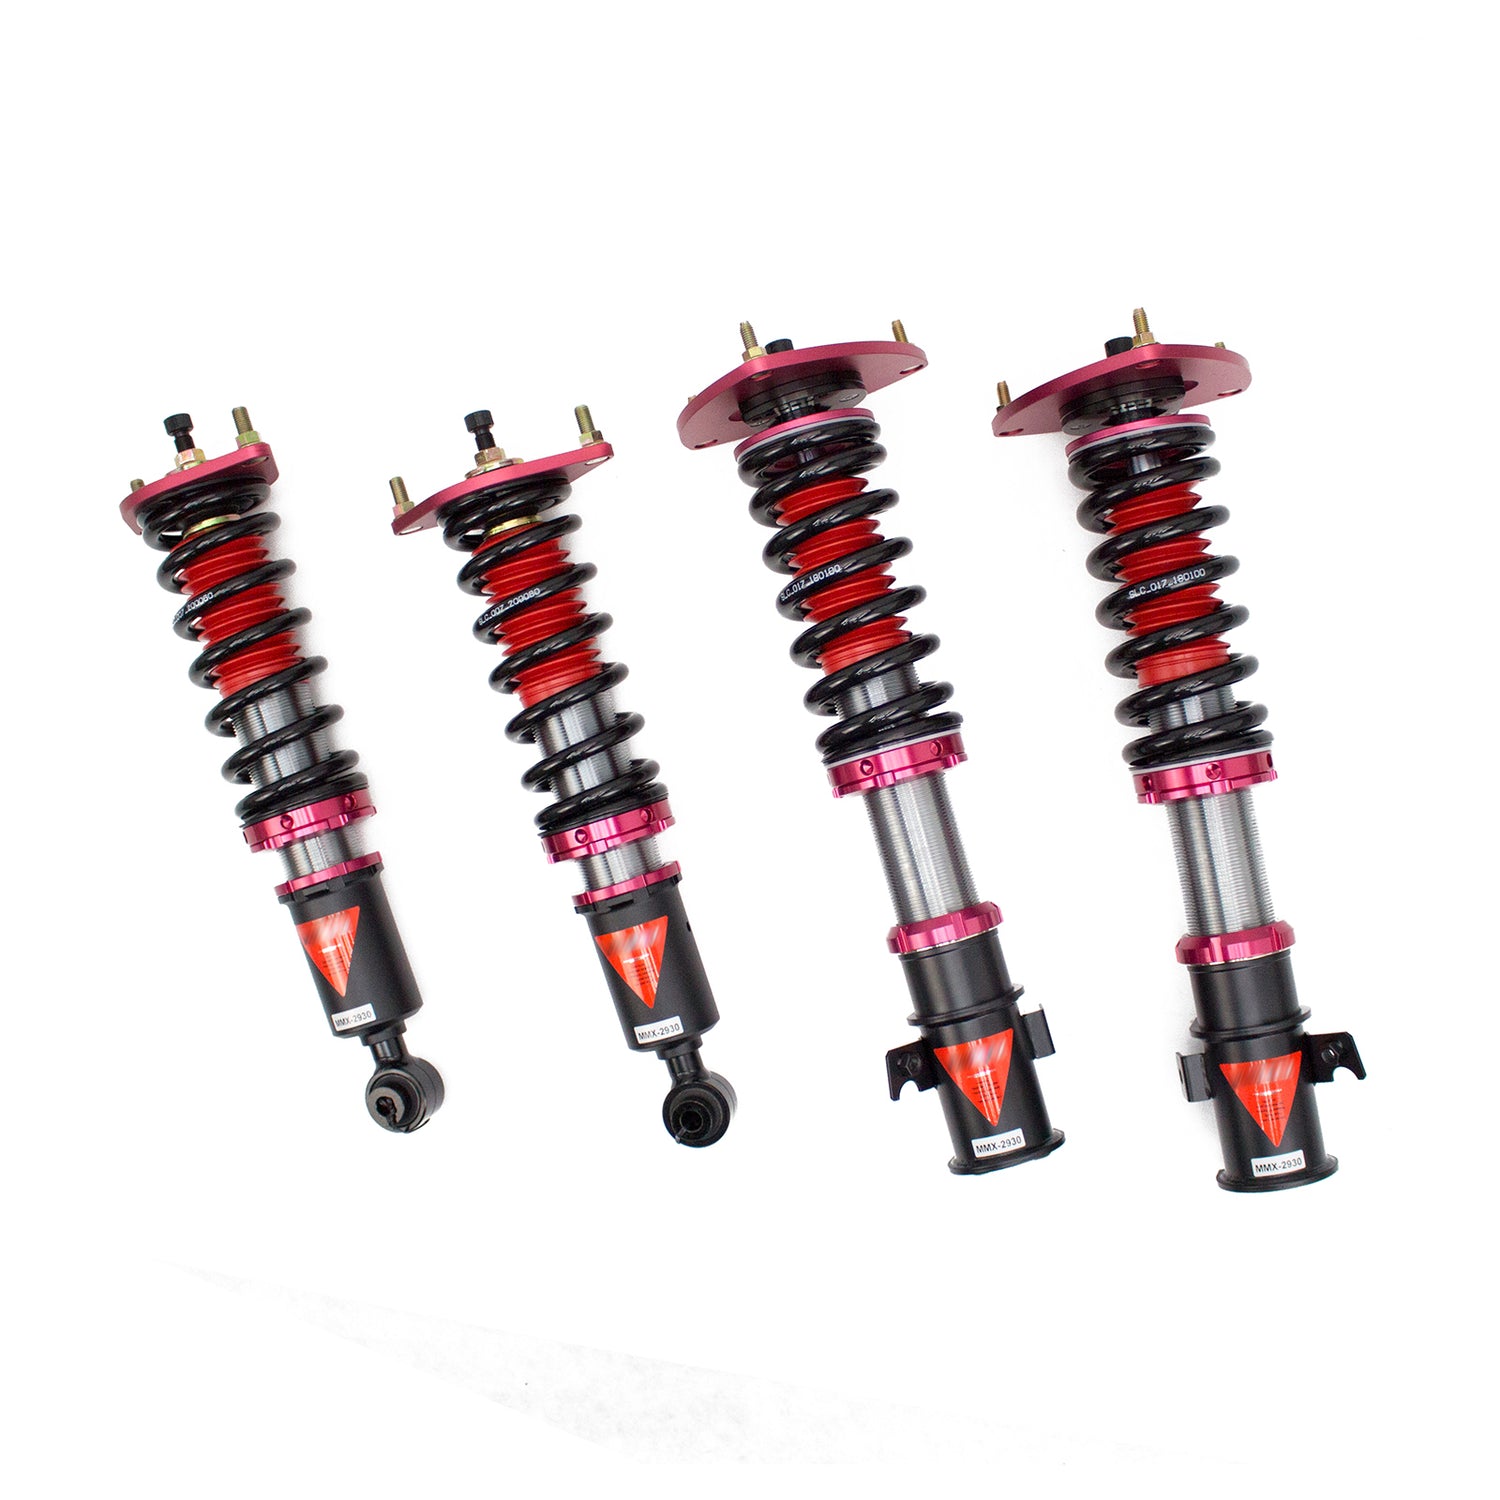 MMX2930 MAXX Coilovers Lowering Kit, Fully Adjustable, Ride Height, 40 Clicks Rebound Settings, Subaru Forester 08-13 (SH)